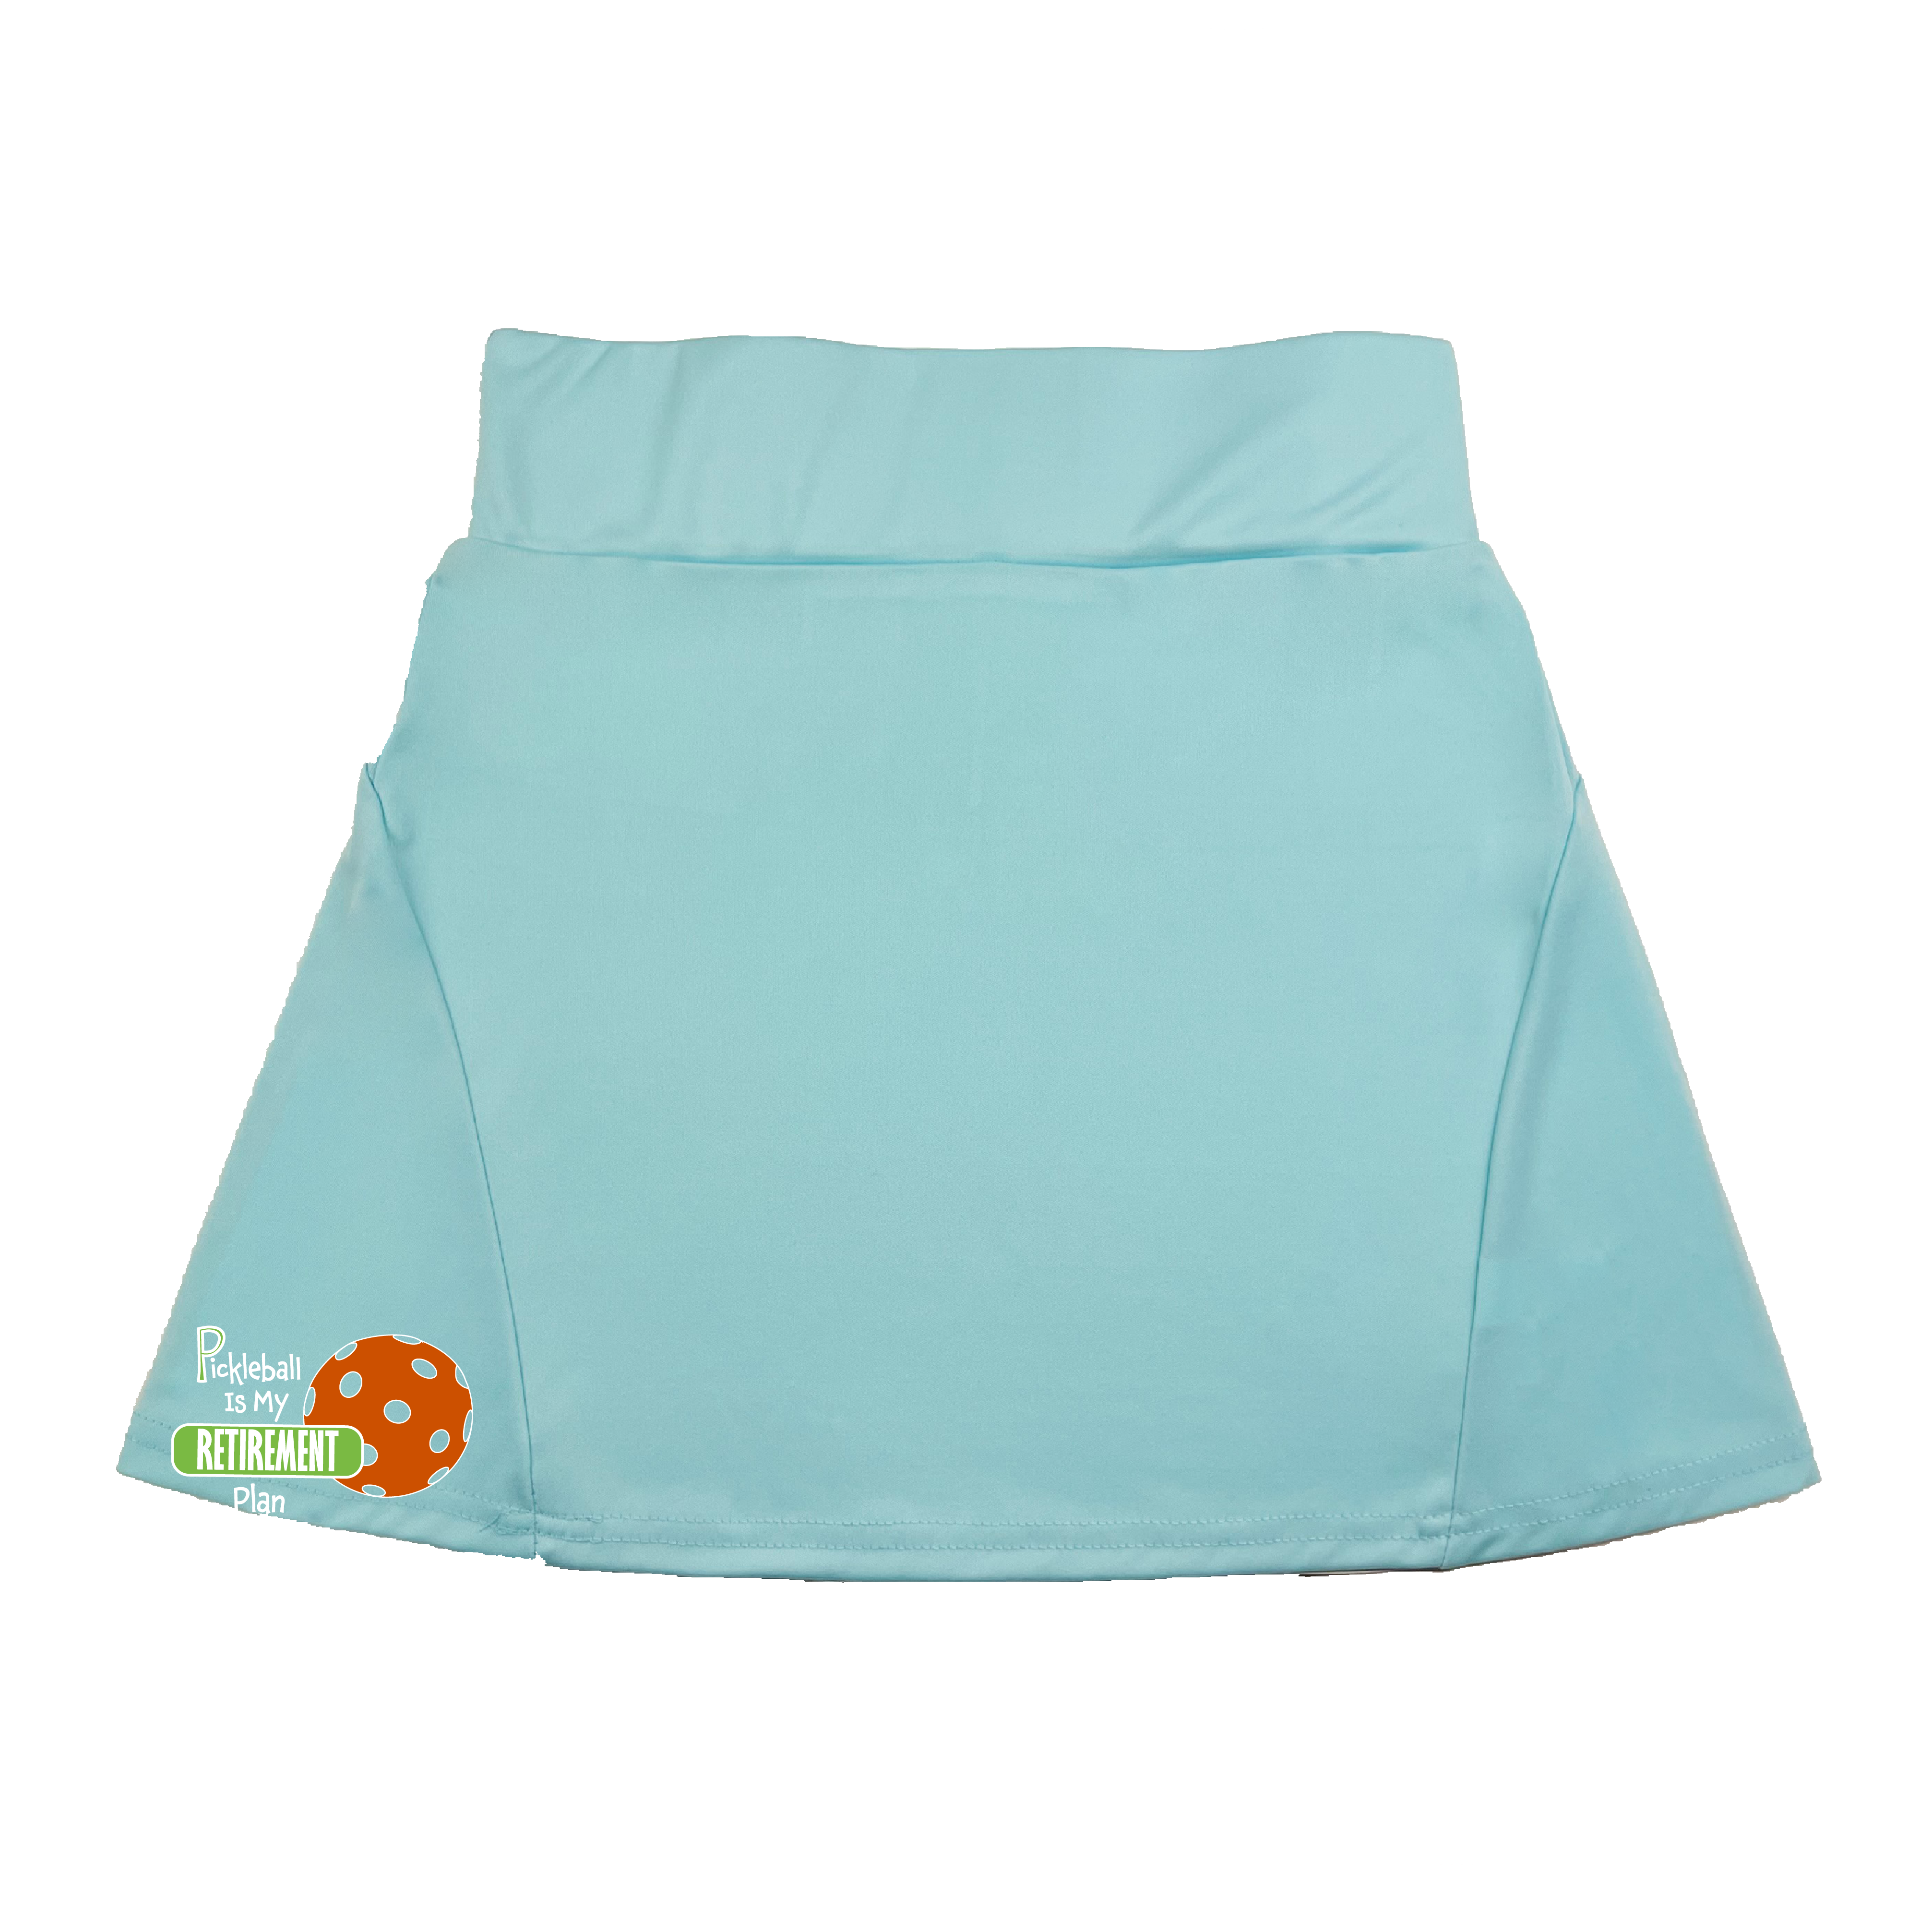 Pickleball Flirty Skort Design:  Pickleball is my Retirement Plan  These flirty skorts have a flat mid-rise waistband with a 3 inch waistband.  Light weight without being see through and the material wicks away moisture quickly.  Flirty pleats in the back with inner shorts for free movement and stylish coverage on the courts.  A functional zipper pocket on the back and two built in pockets on the shorts for convenient storage. 